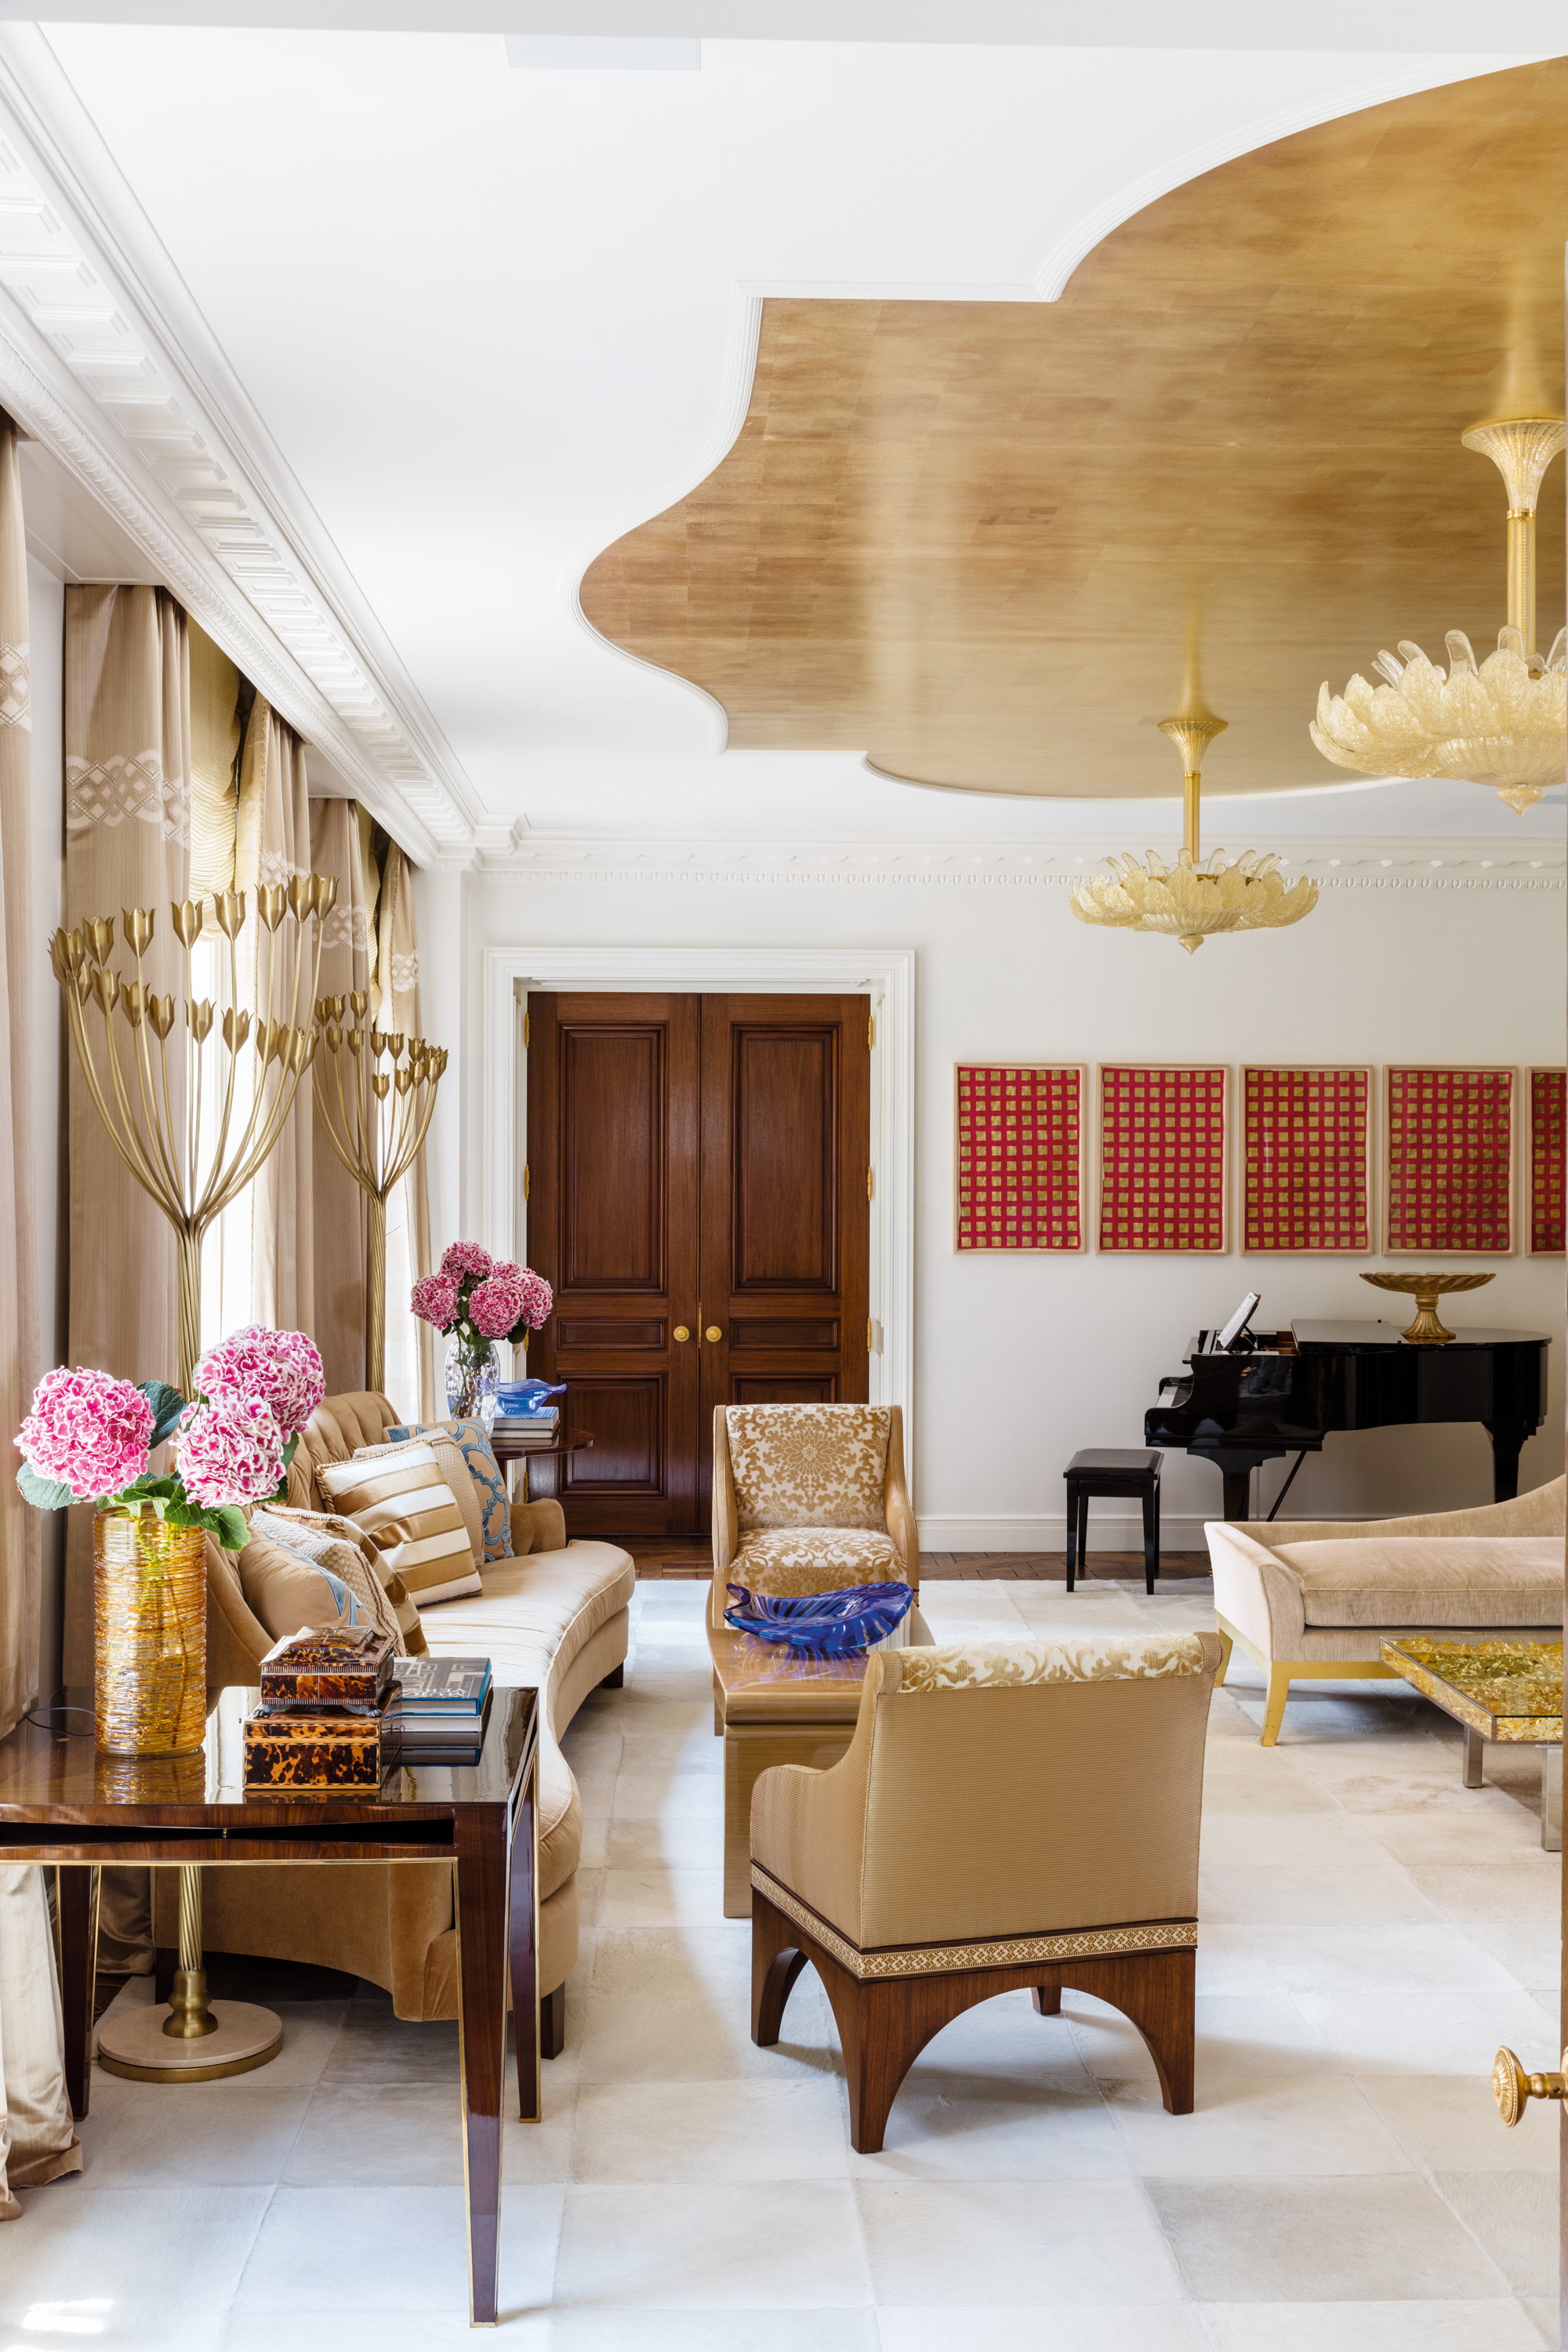 This New York Apartment Is a Shrine to Art Deco Galerie